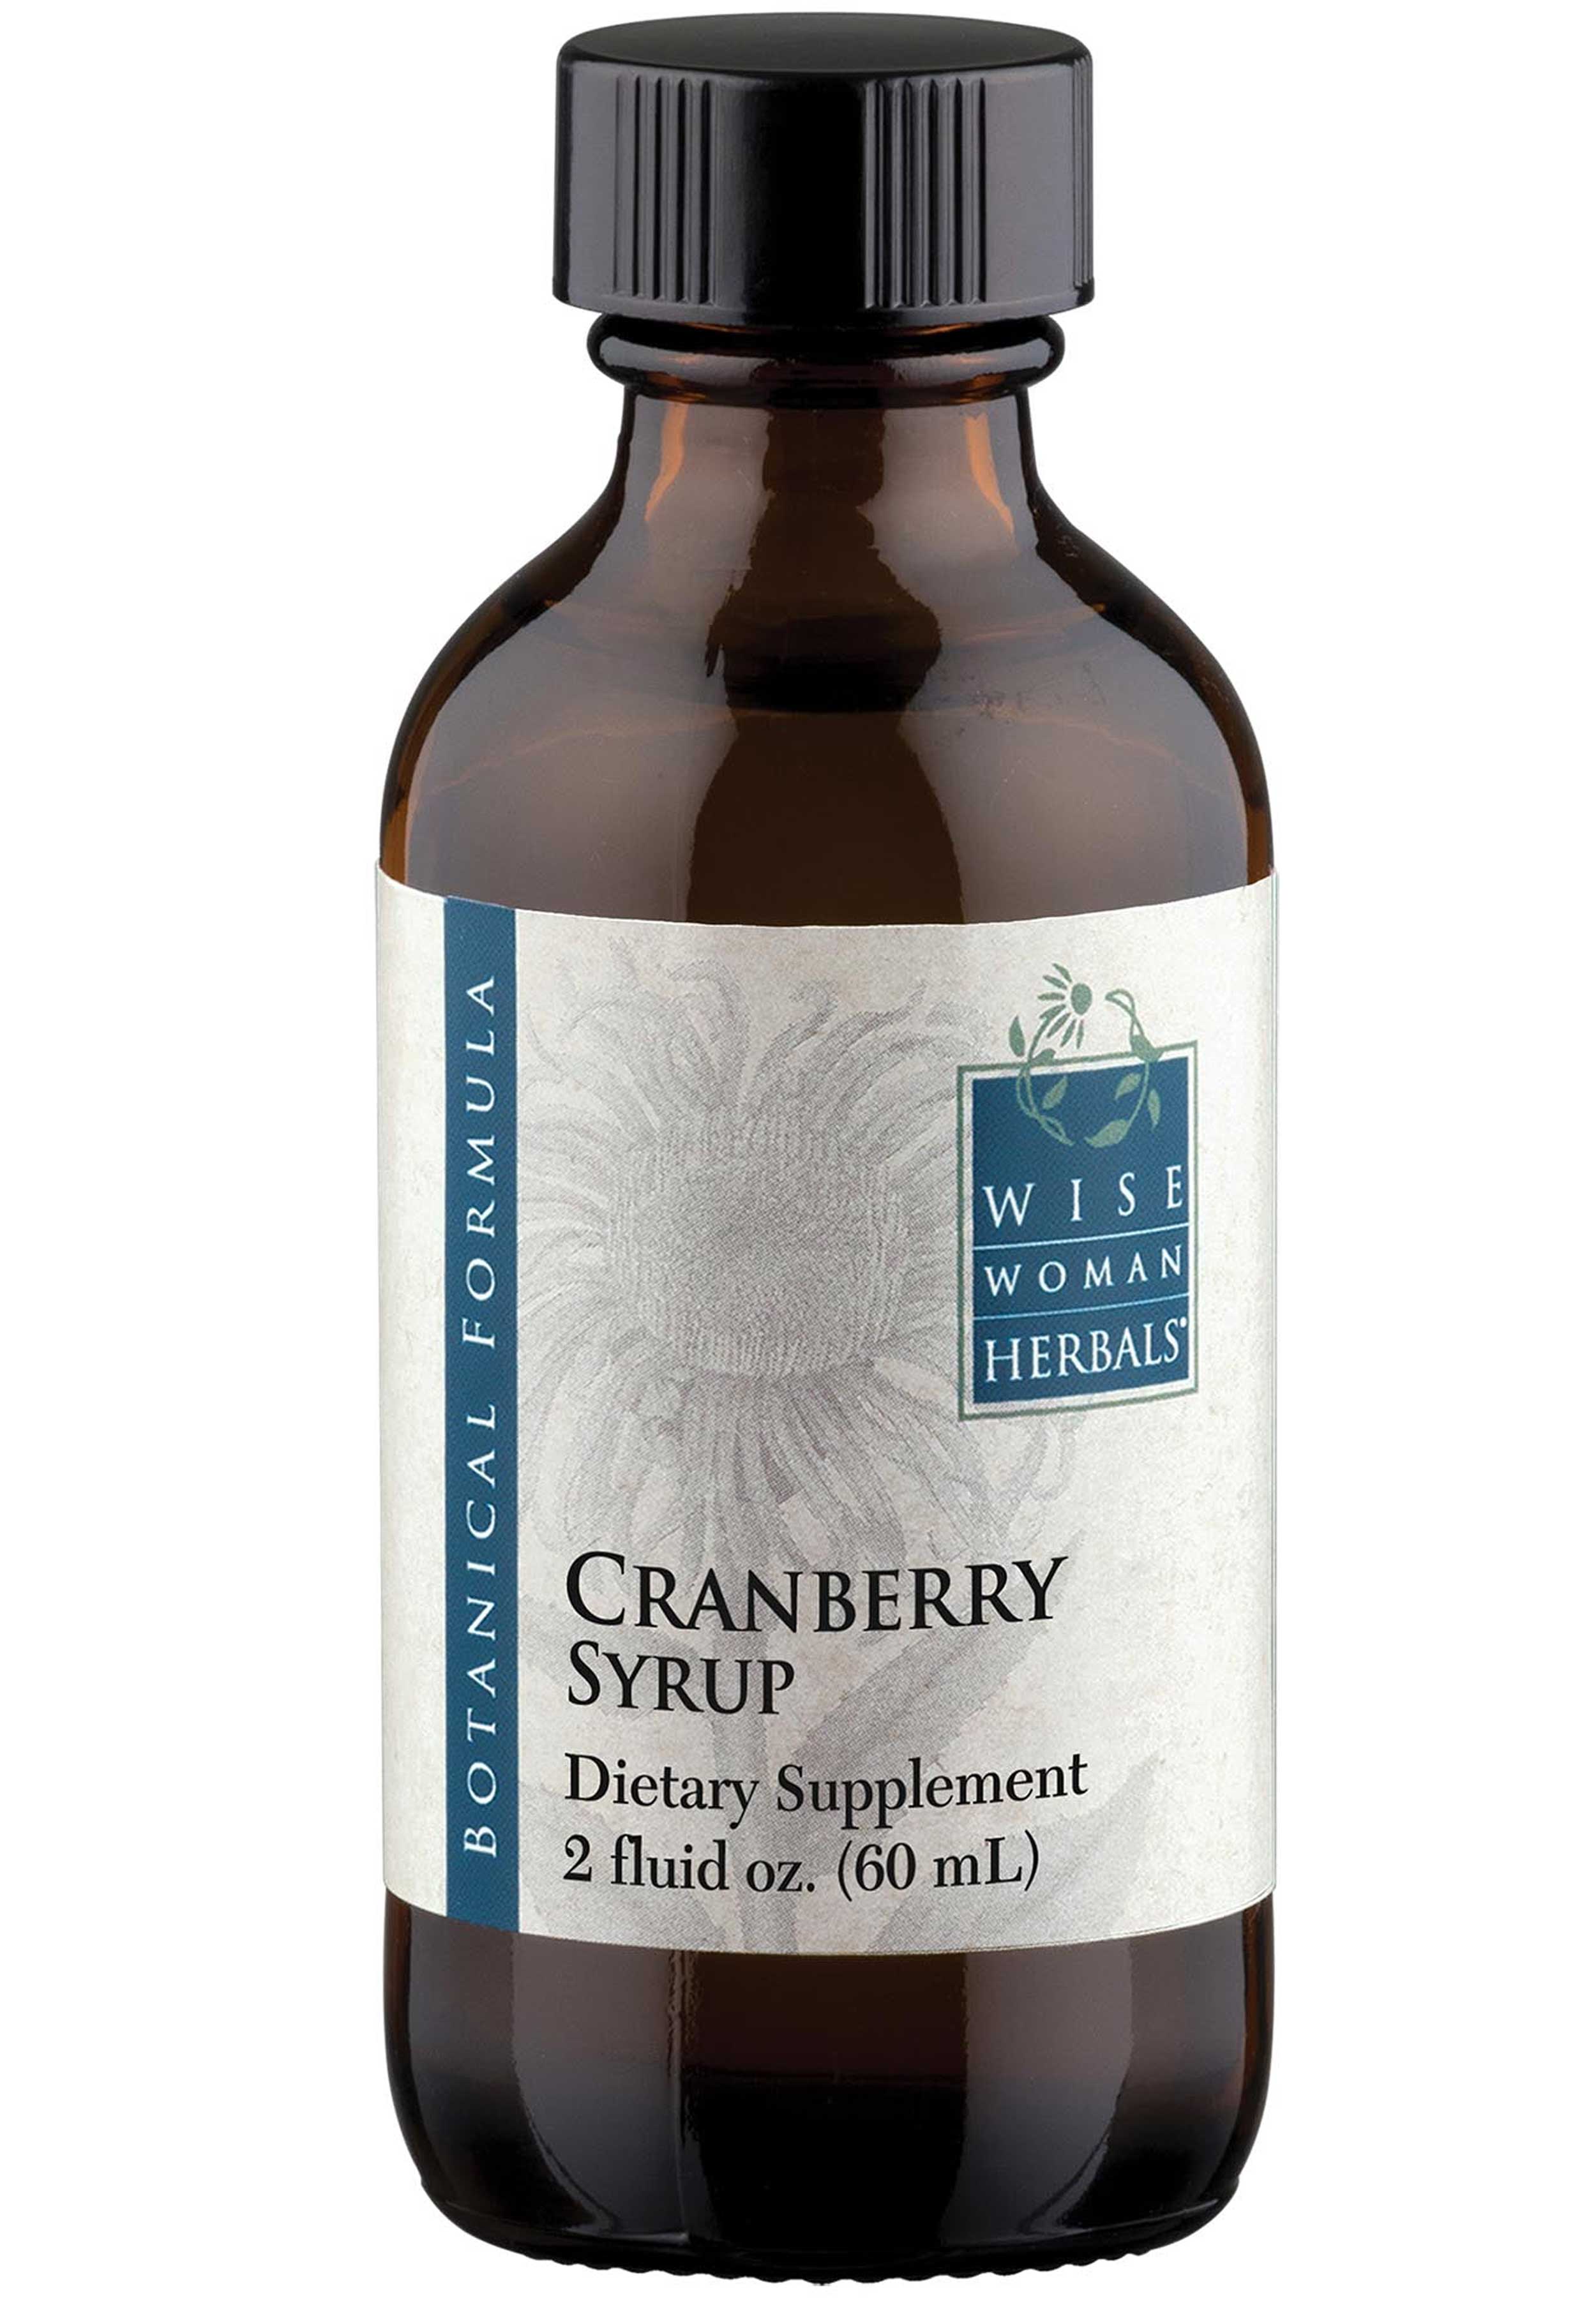 Wise Woman Herbals Cranberry Syrup